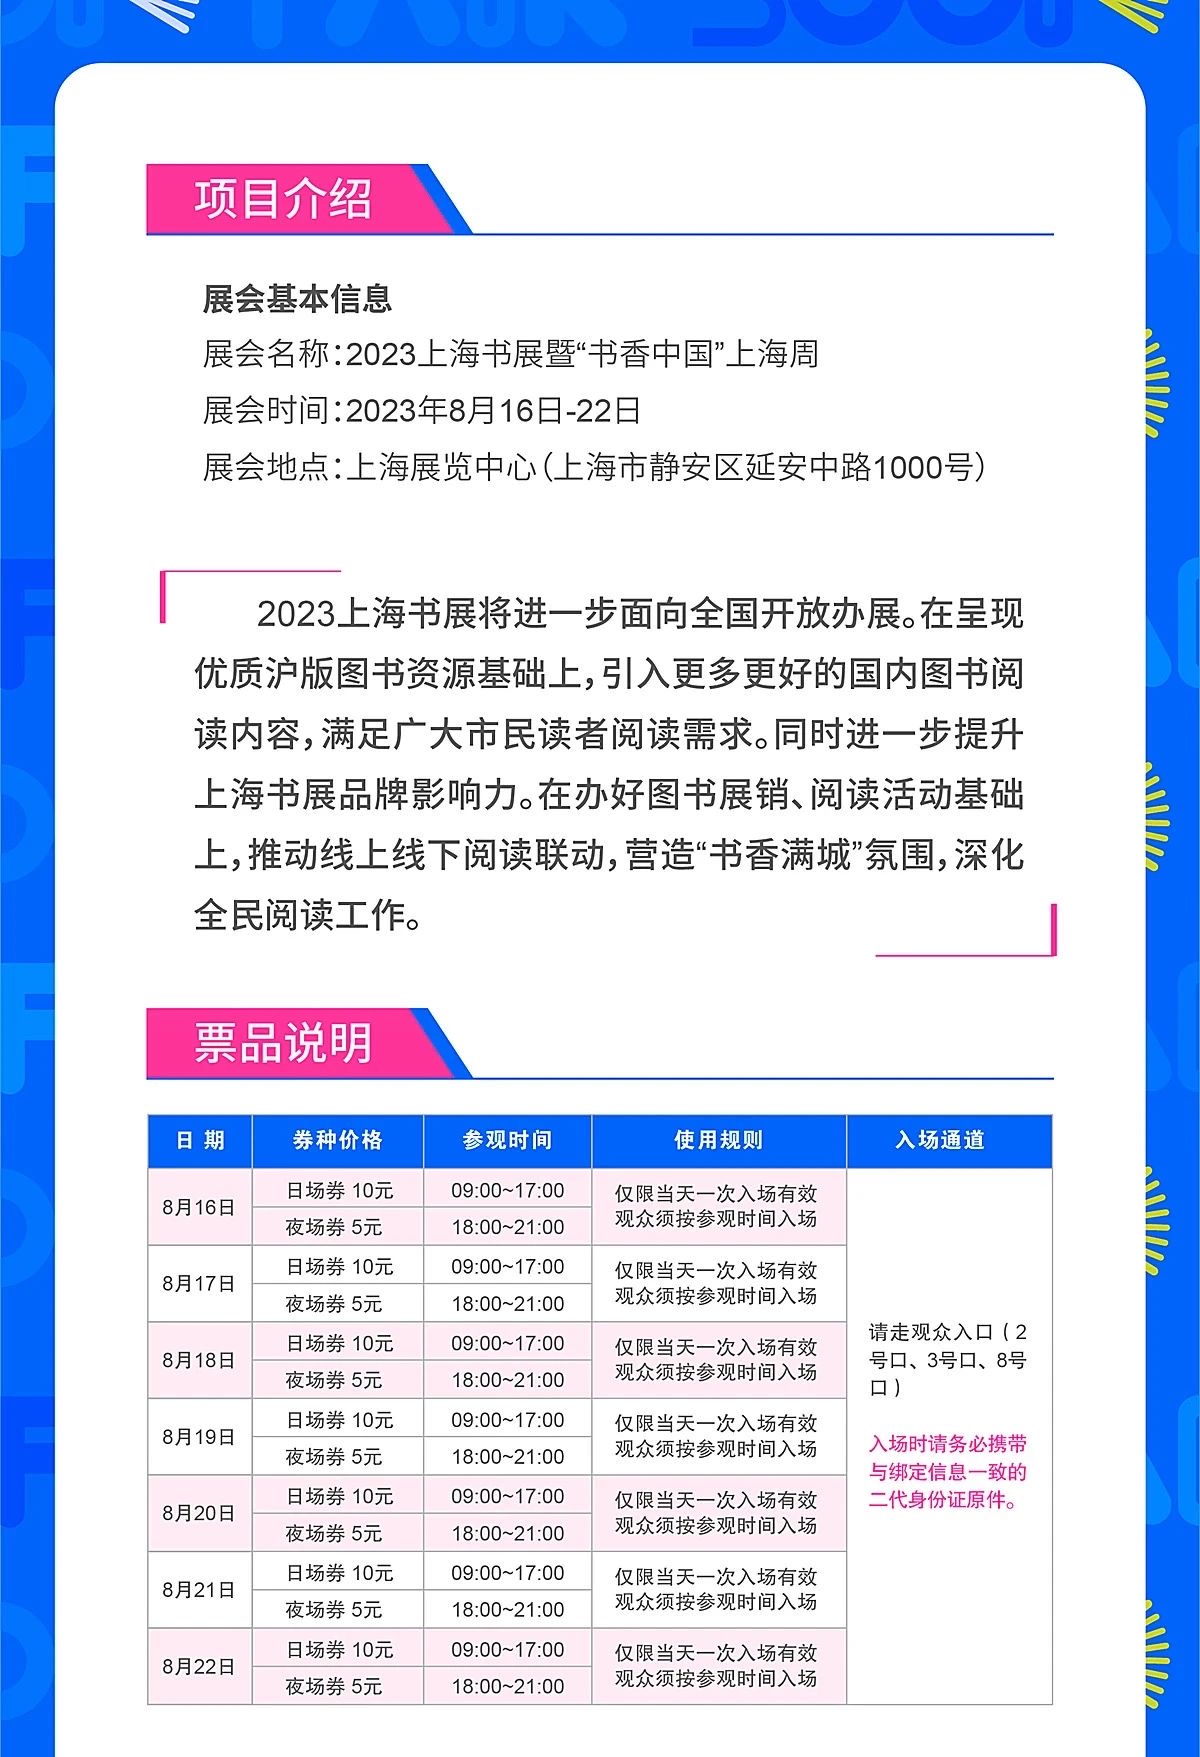 Ticket sales for the 2023 Shanghai Book Fair are open! Ticket Purchase Entry Strategy - Today at 15:00 Gate | Shanghai | Ticket Sales